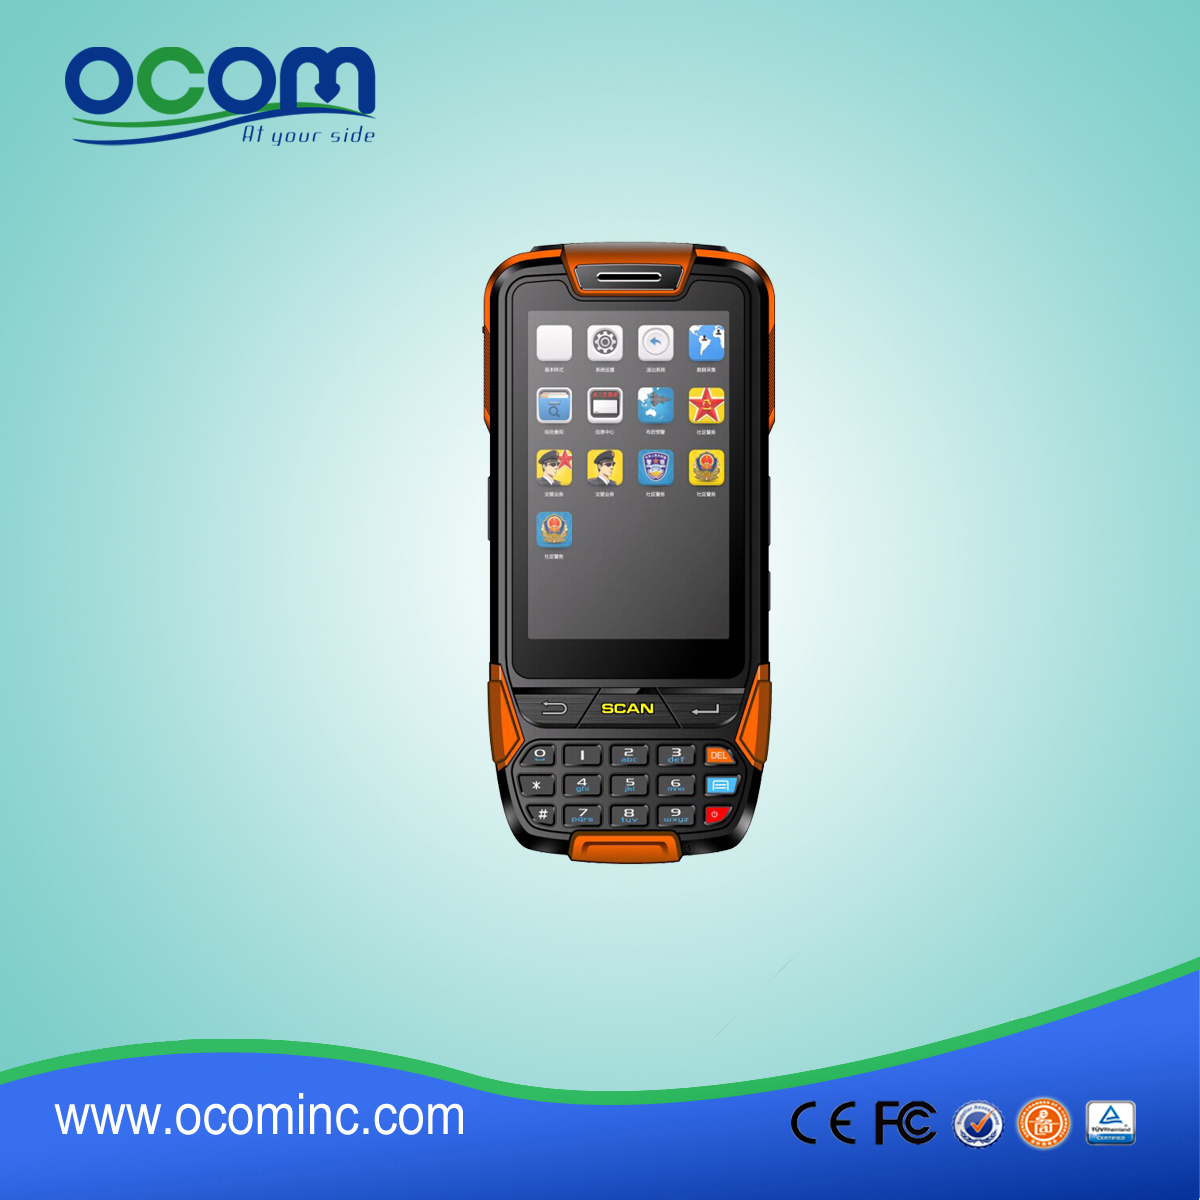 Cina Realizzato Handheld Android Terminale POS Data Collector OCB-D8000